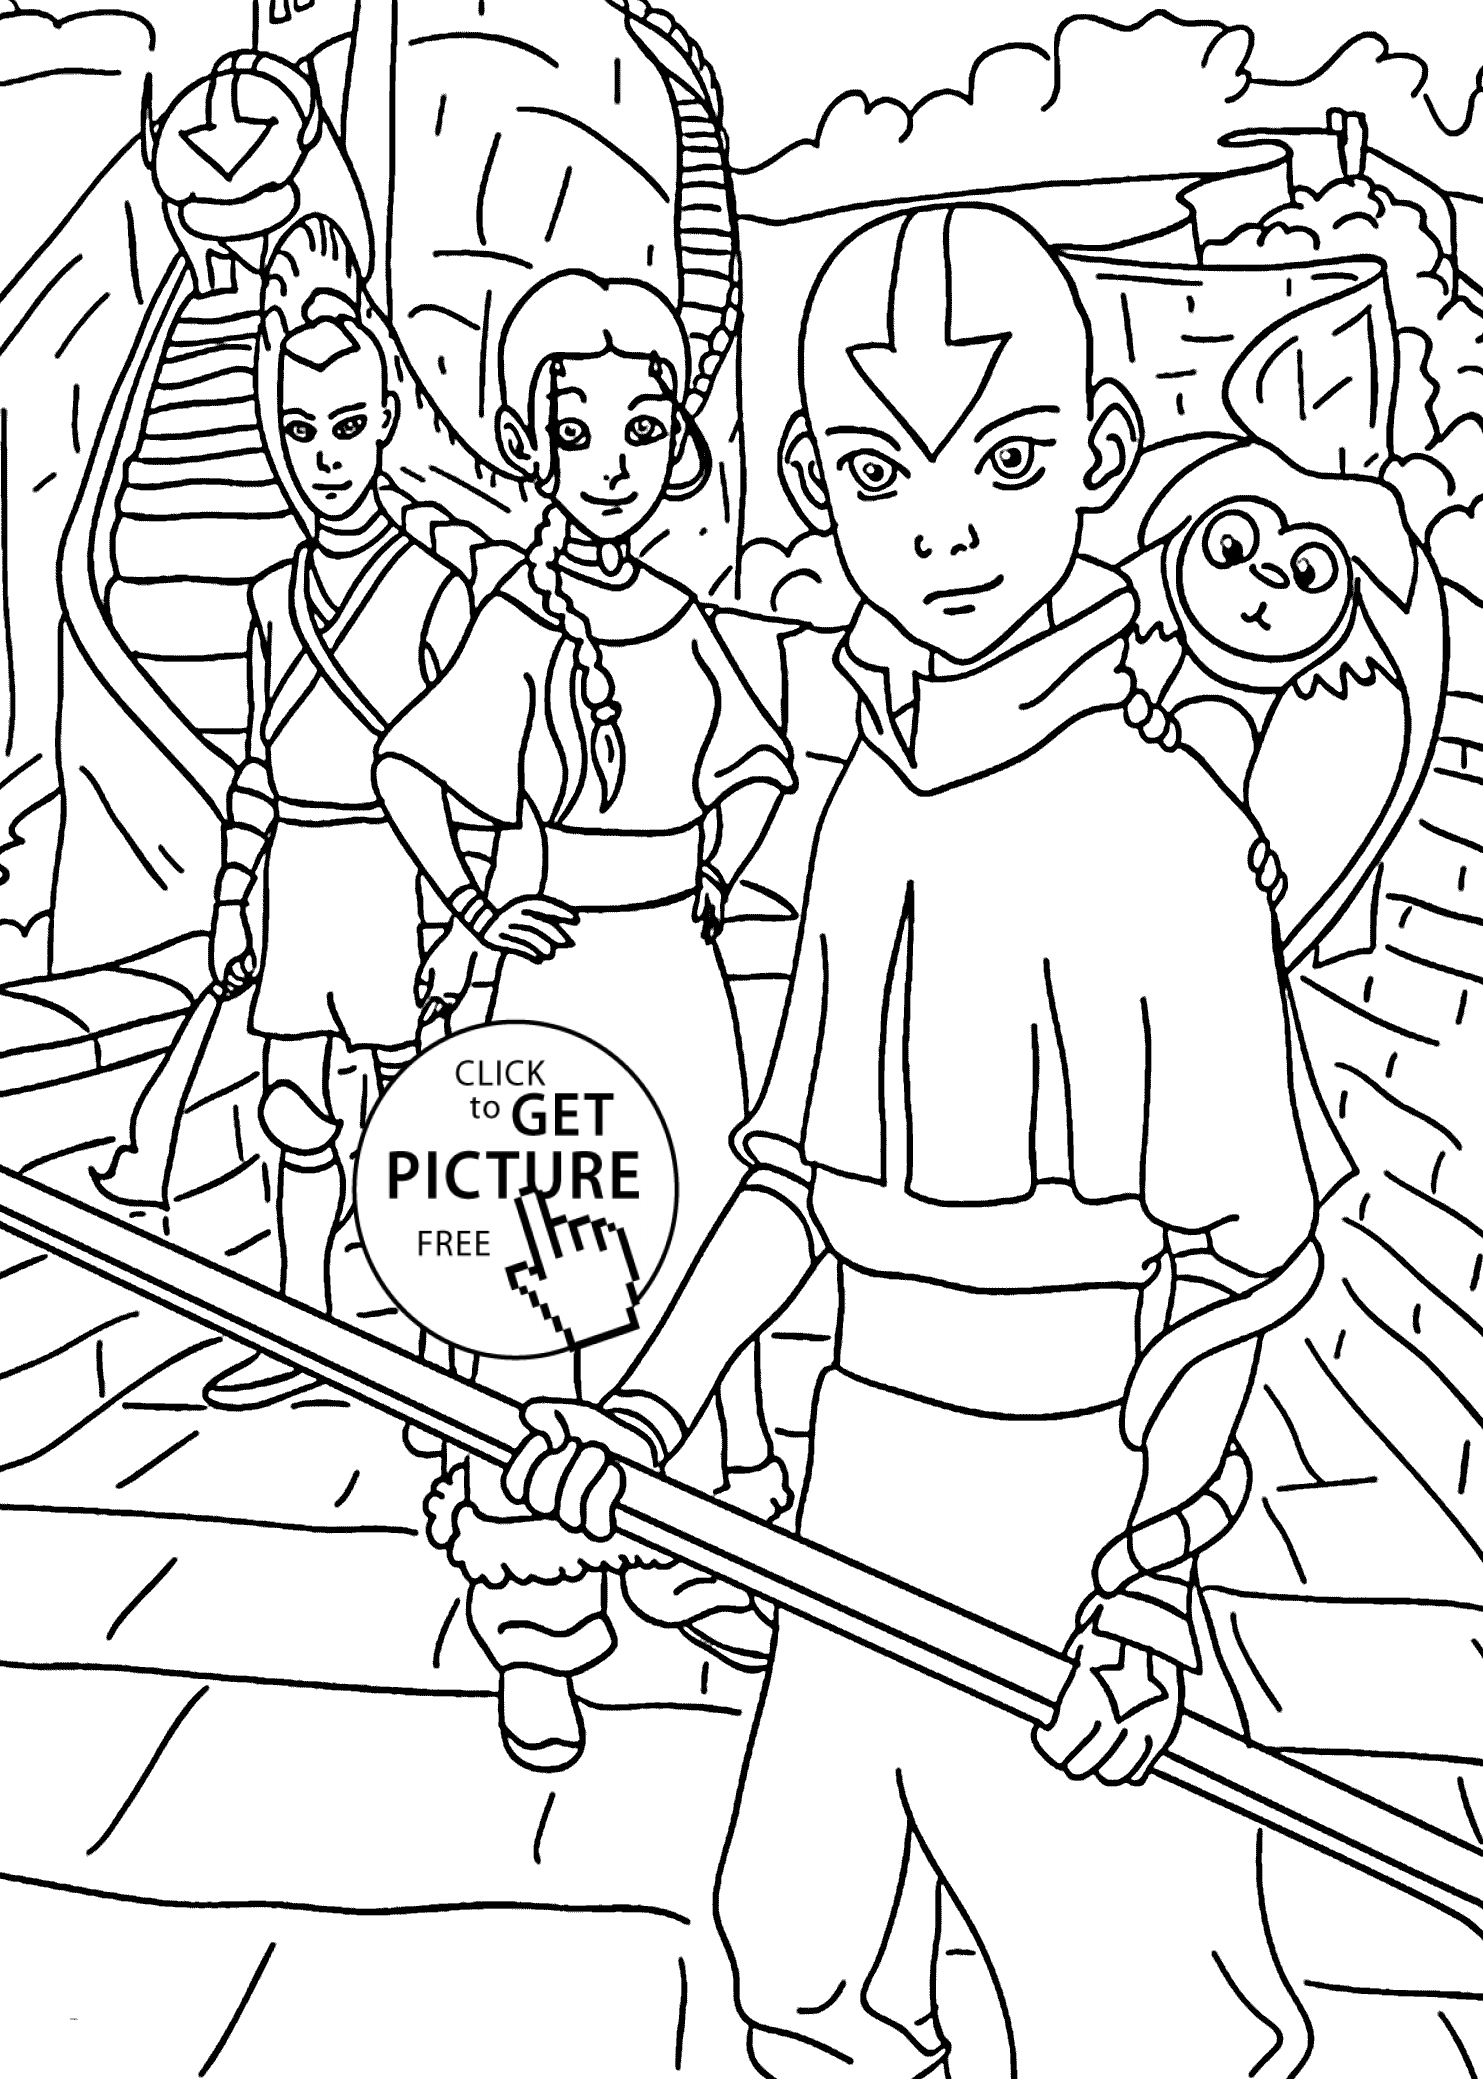 Legend Of Korra Coloring Pages Free To Print - Coloring Home